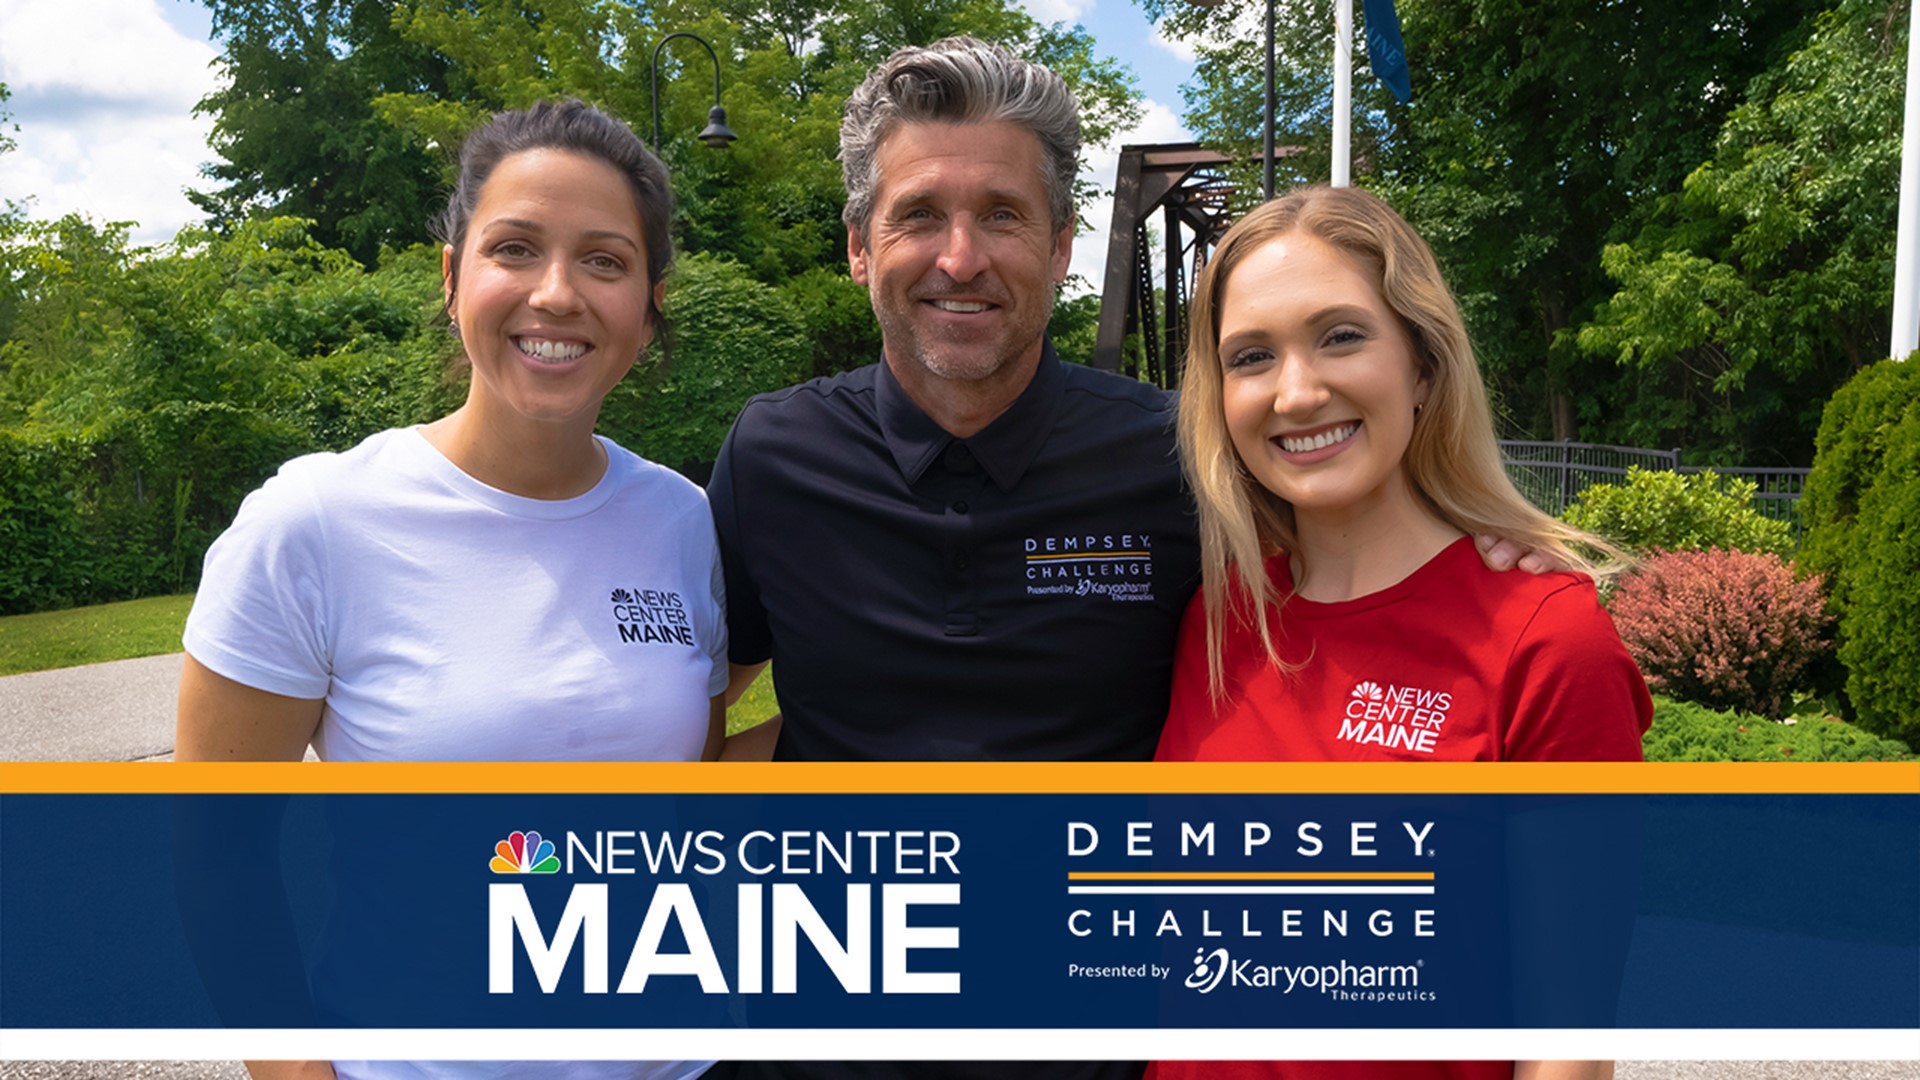 Patrick Dempsey is gearing up with Amanda Hill and Chloe Teboe for this year's Dempsey Challenge! Registration is now open, go to DempseyChallenge.org for more info.